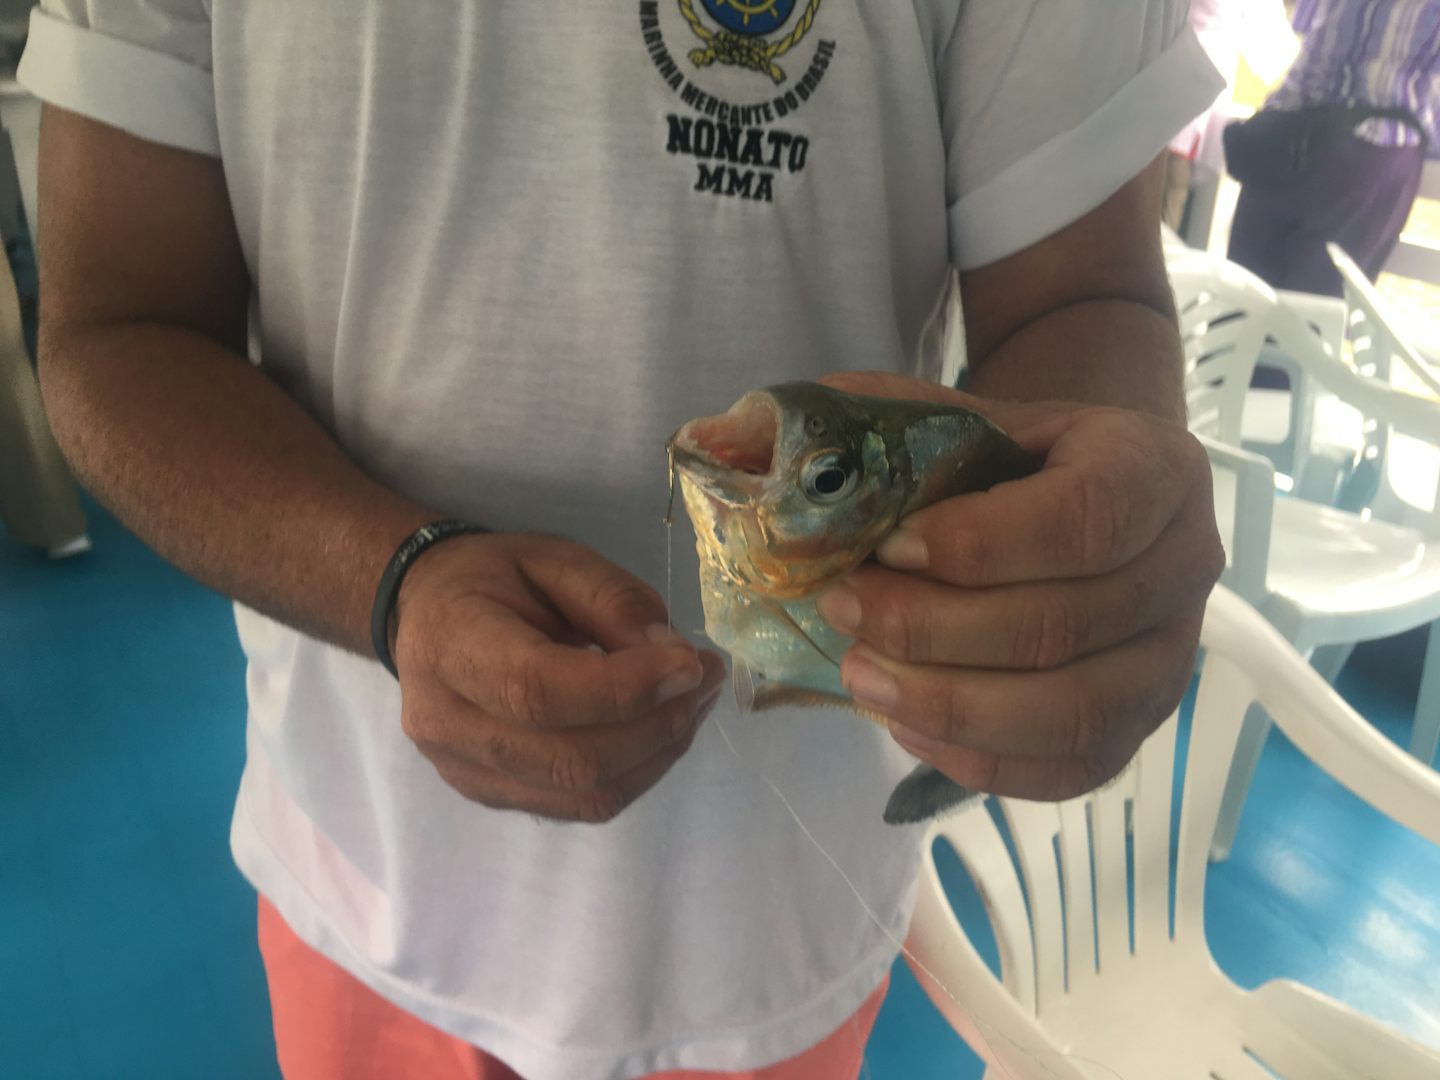 Piranha caught by another traveler. This was a good shore excursion. Excell